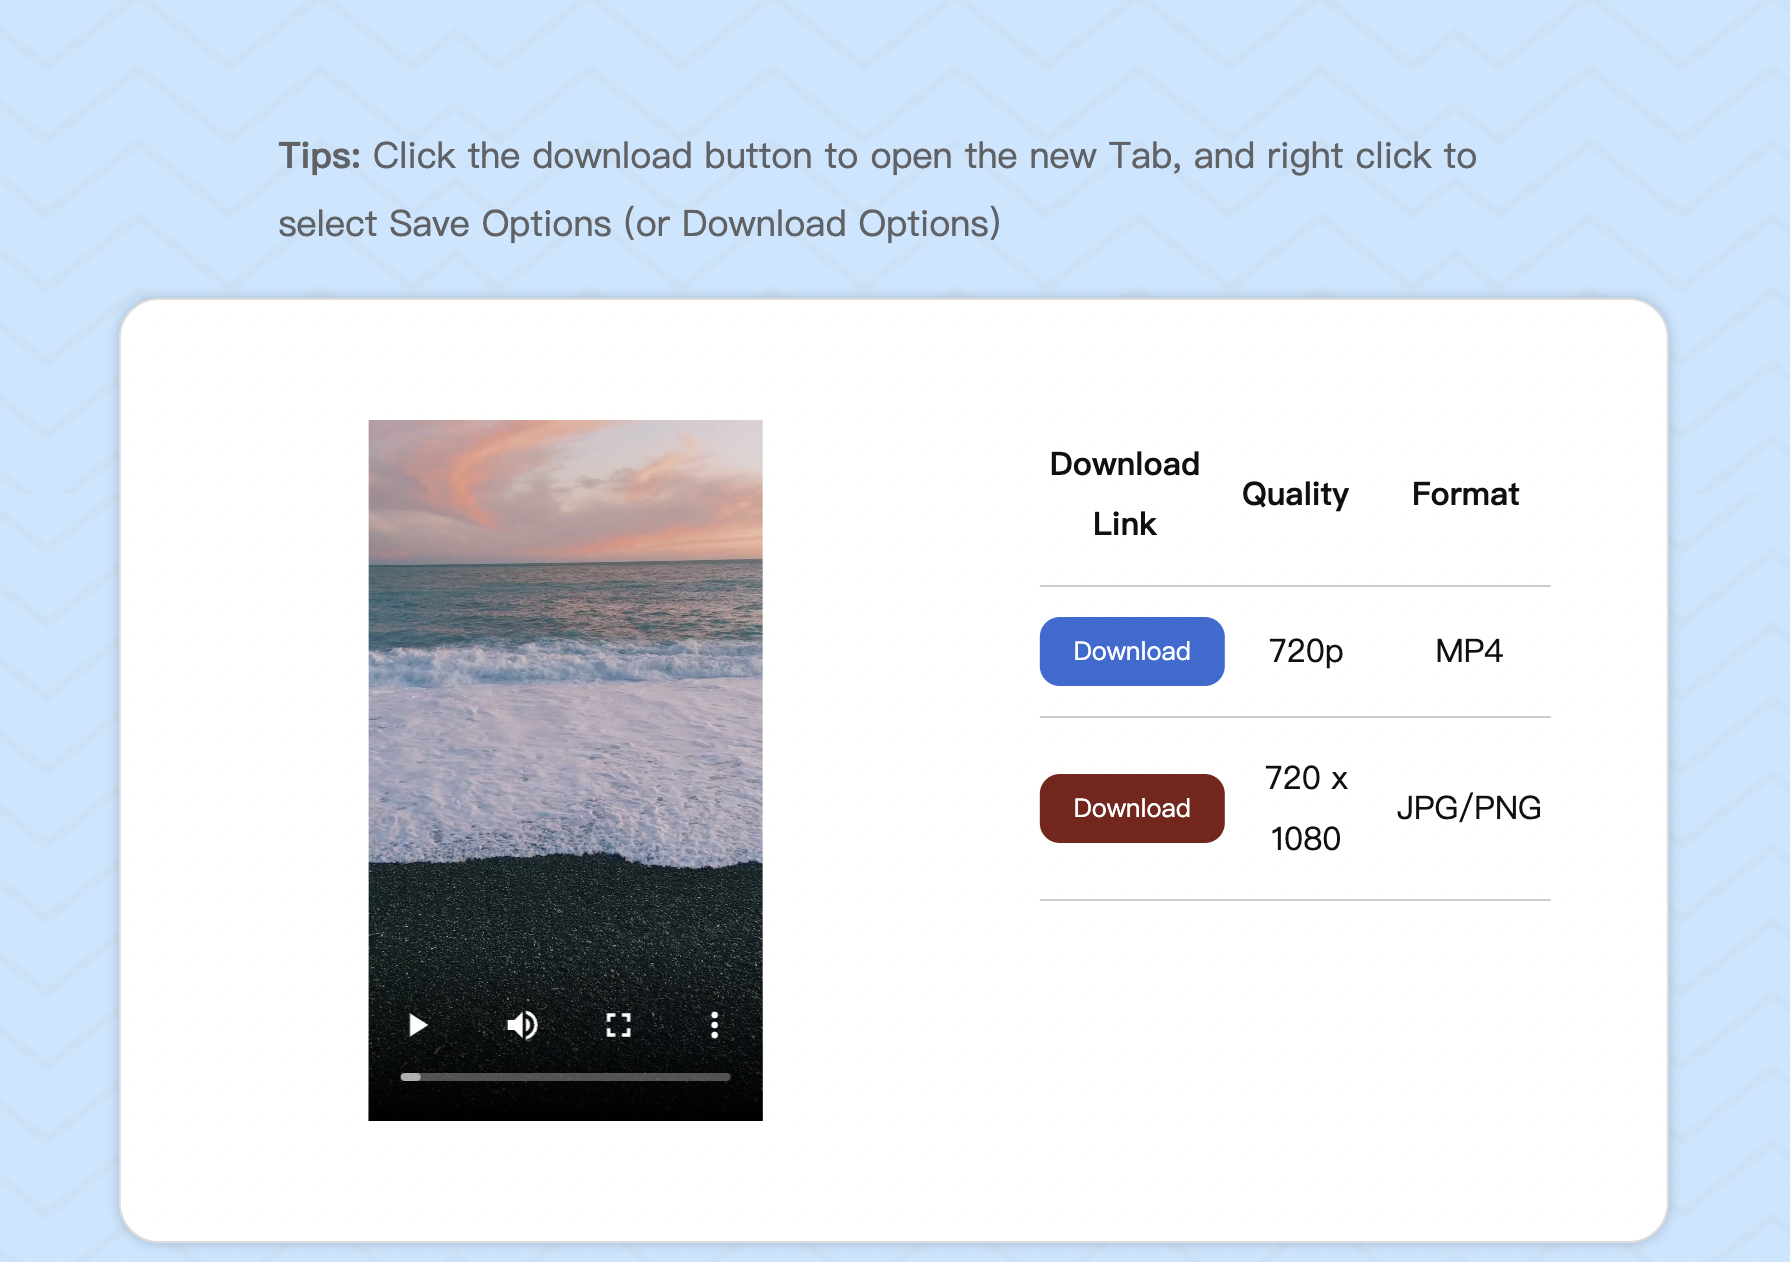 Choose to save in Mp4 format or save in Png/Jpg format